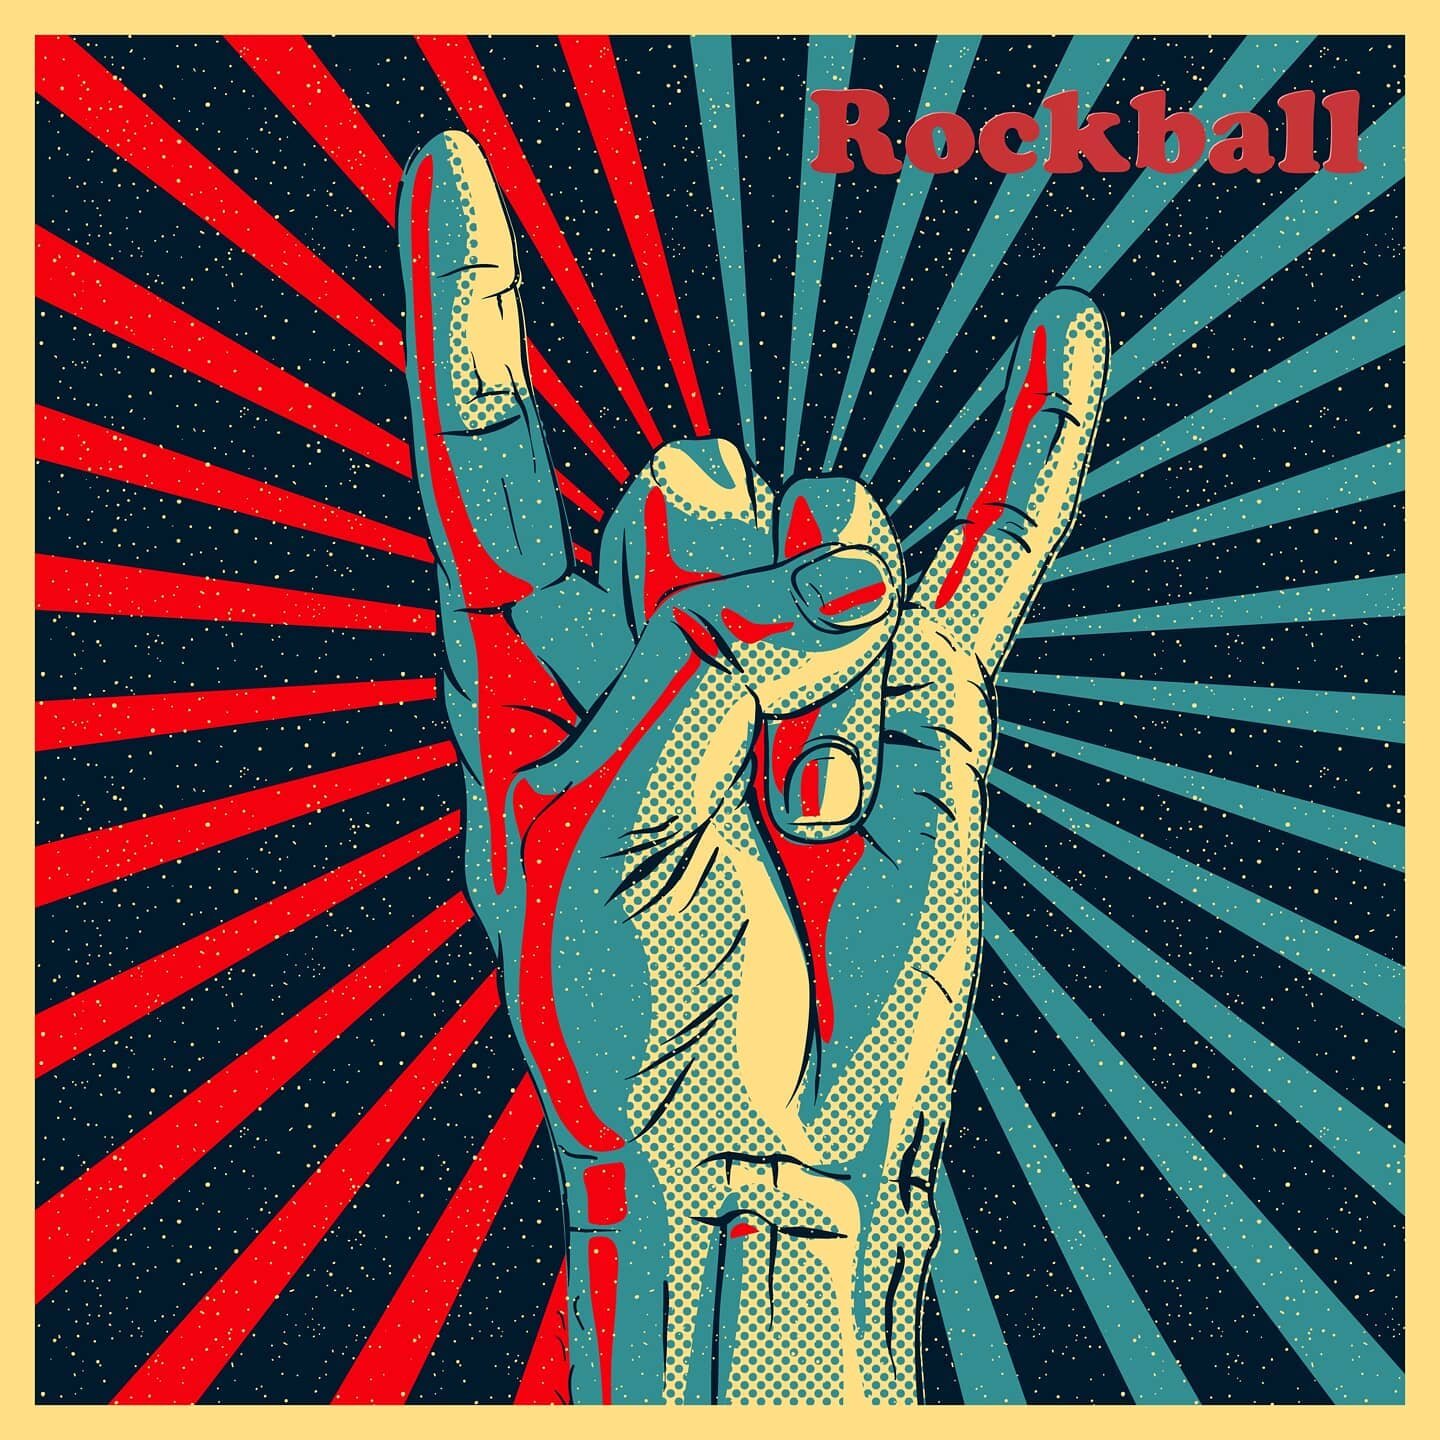 Rockball is hitting some of the digital stores this Friday. Get an early copy here www.jimiandthestrangers.com (link in bio). #spotify #rockball @spotify #rock #jimiandthestrangers #rockball #rockmusic #rockandroll #newsingle #newmusic #music #indiem